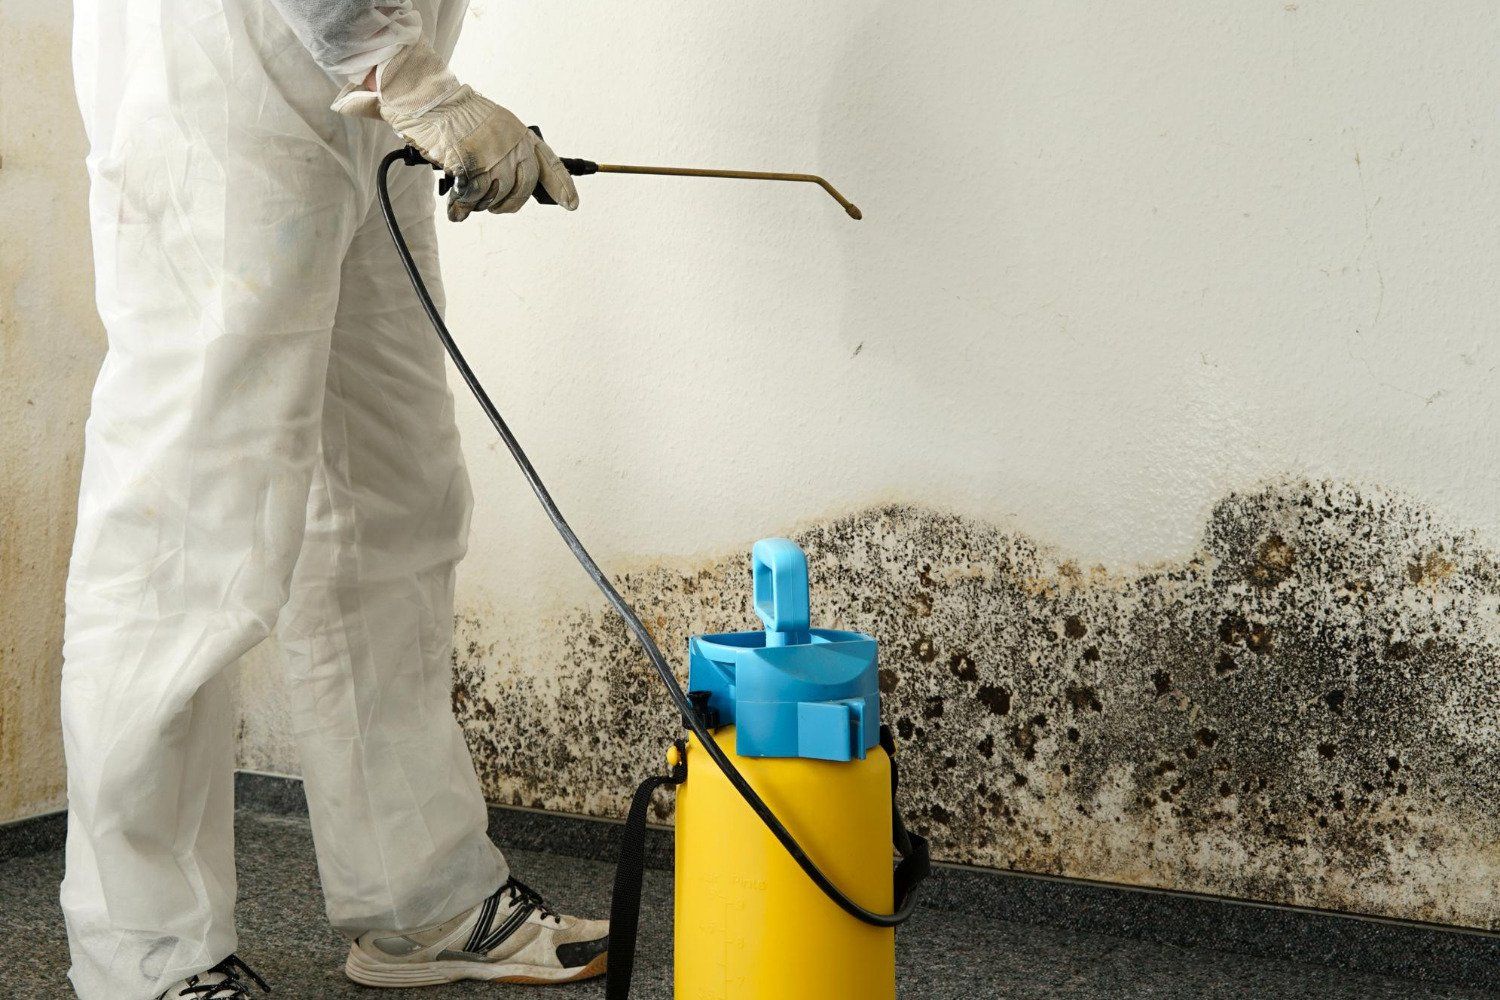 What You Should Know About Mold After a Flood